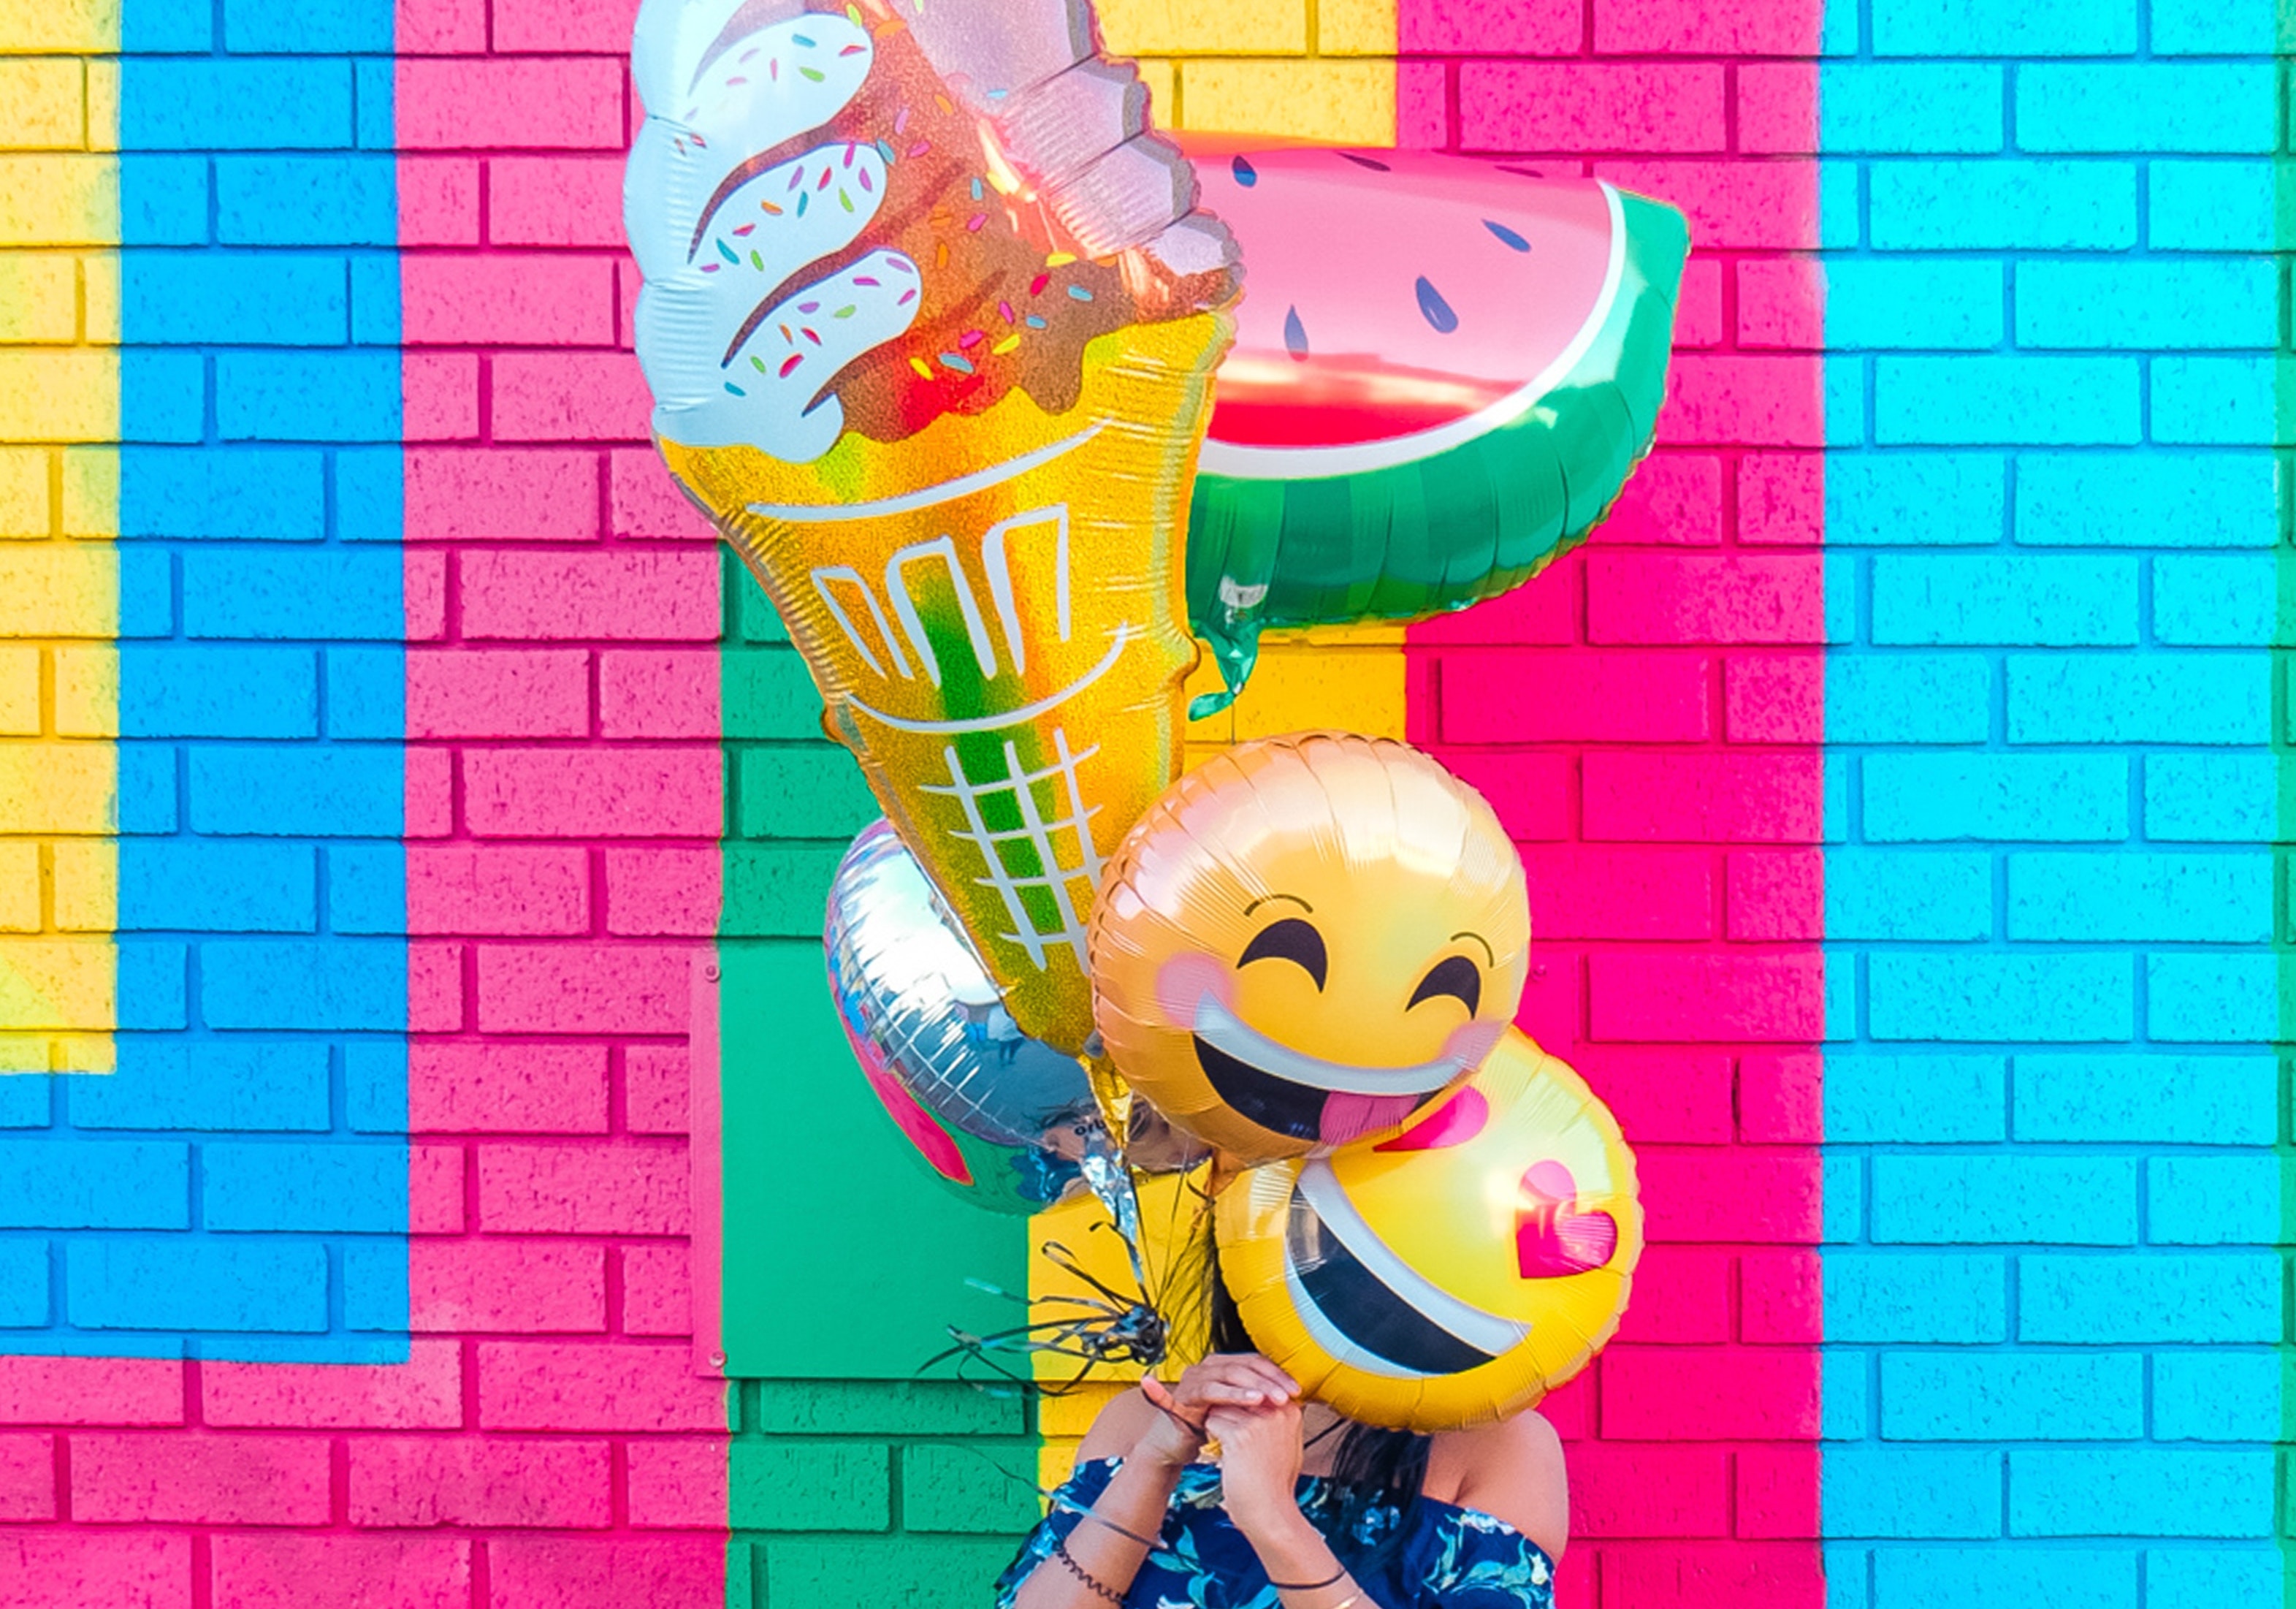 Person holding helium balloons in front of colorful brick wall